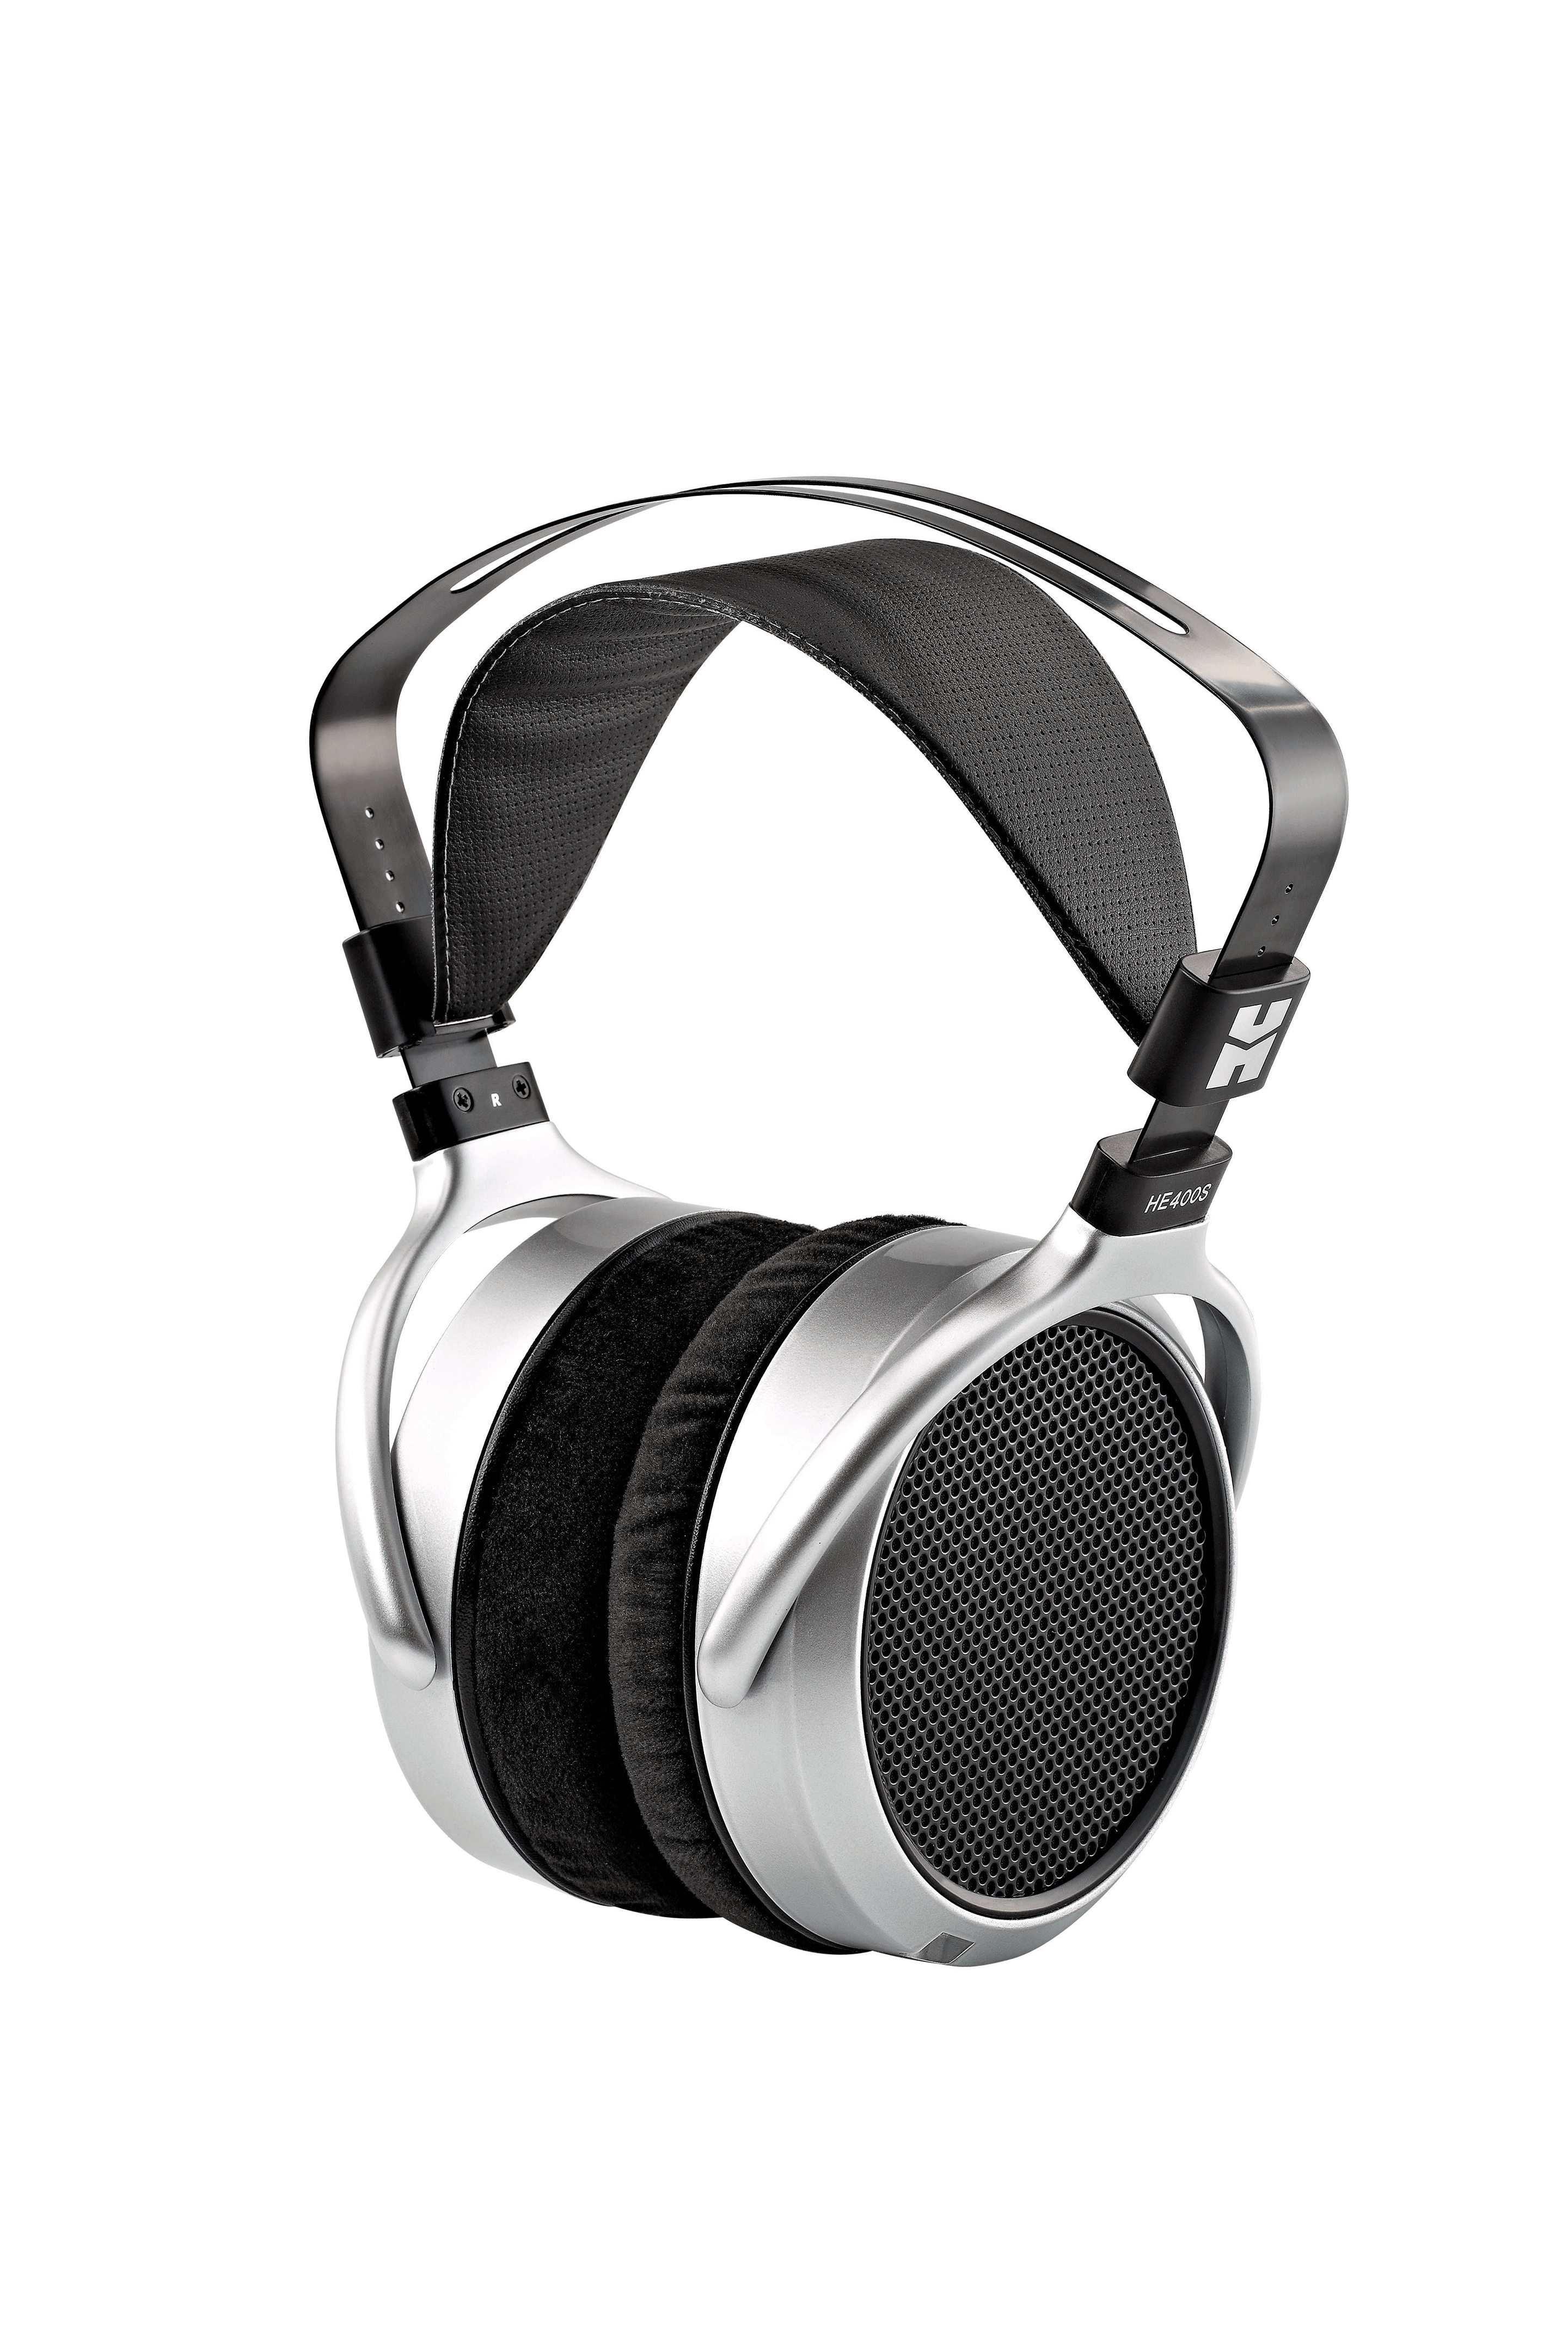 Buy HIFIMAN HE400S Over Ear Headphone at HiFiNage in India with warranty.